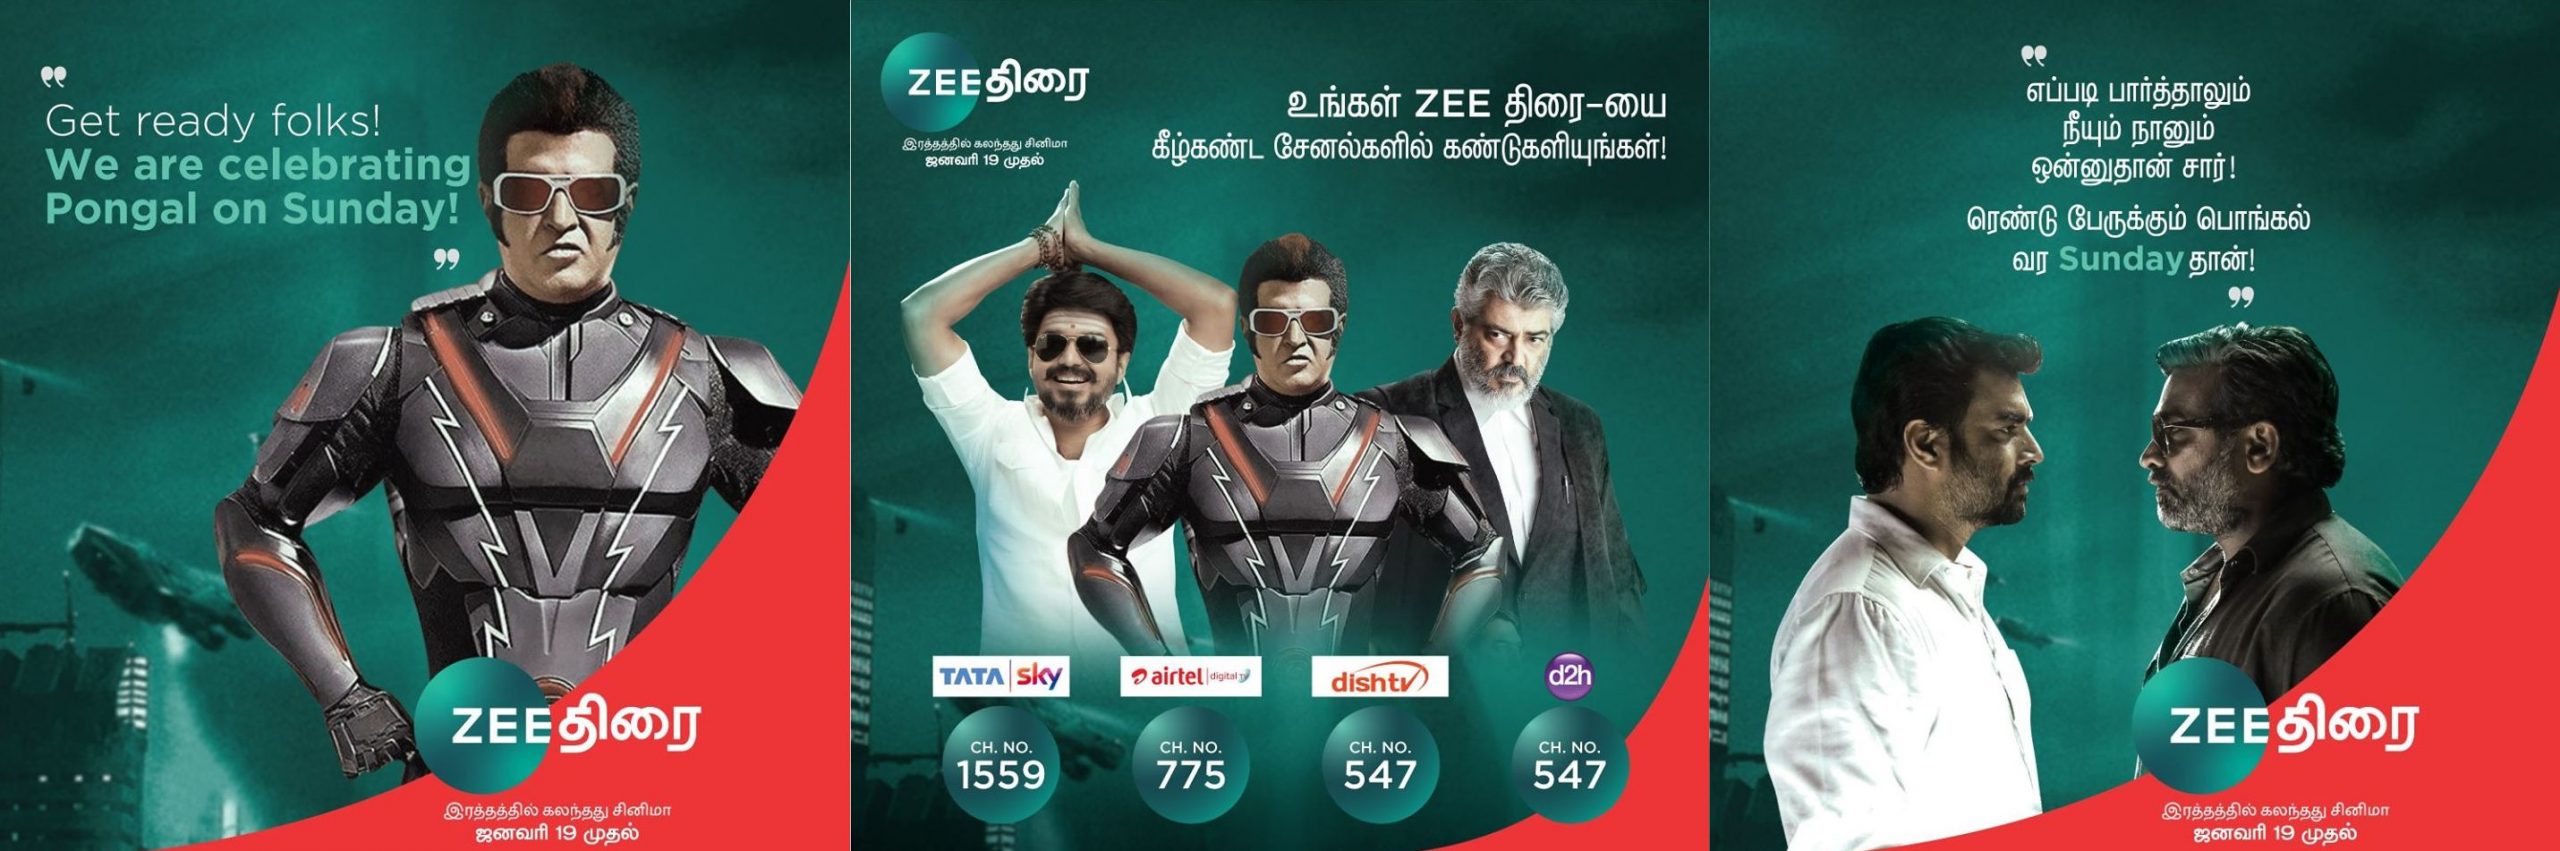 zee thirai channel number in dth services